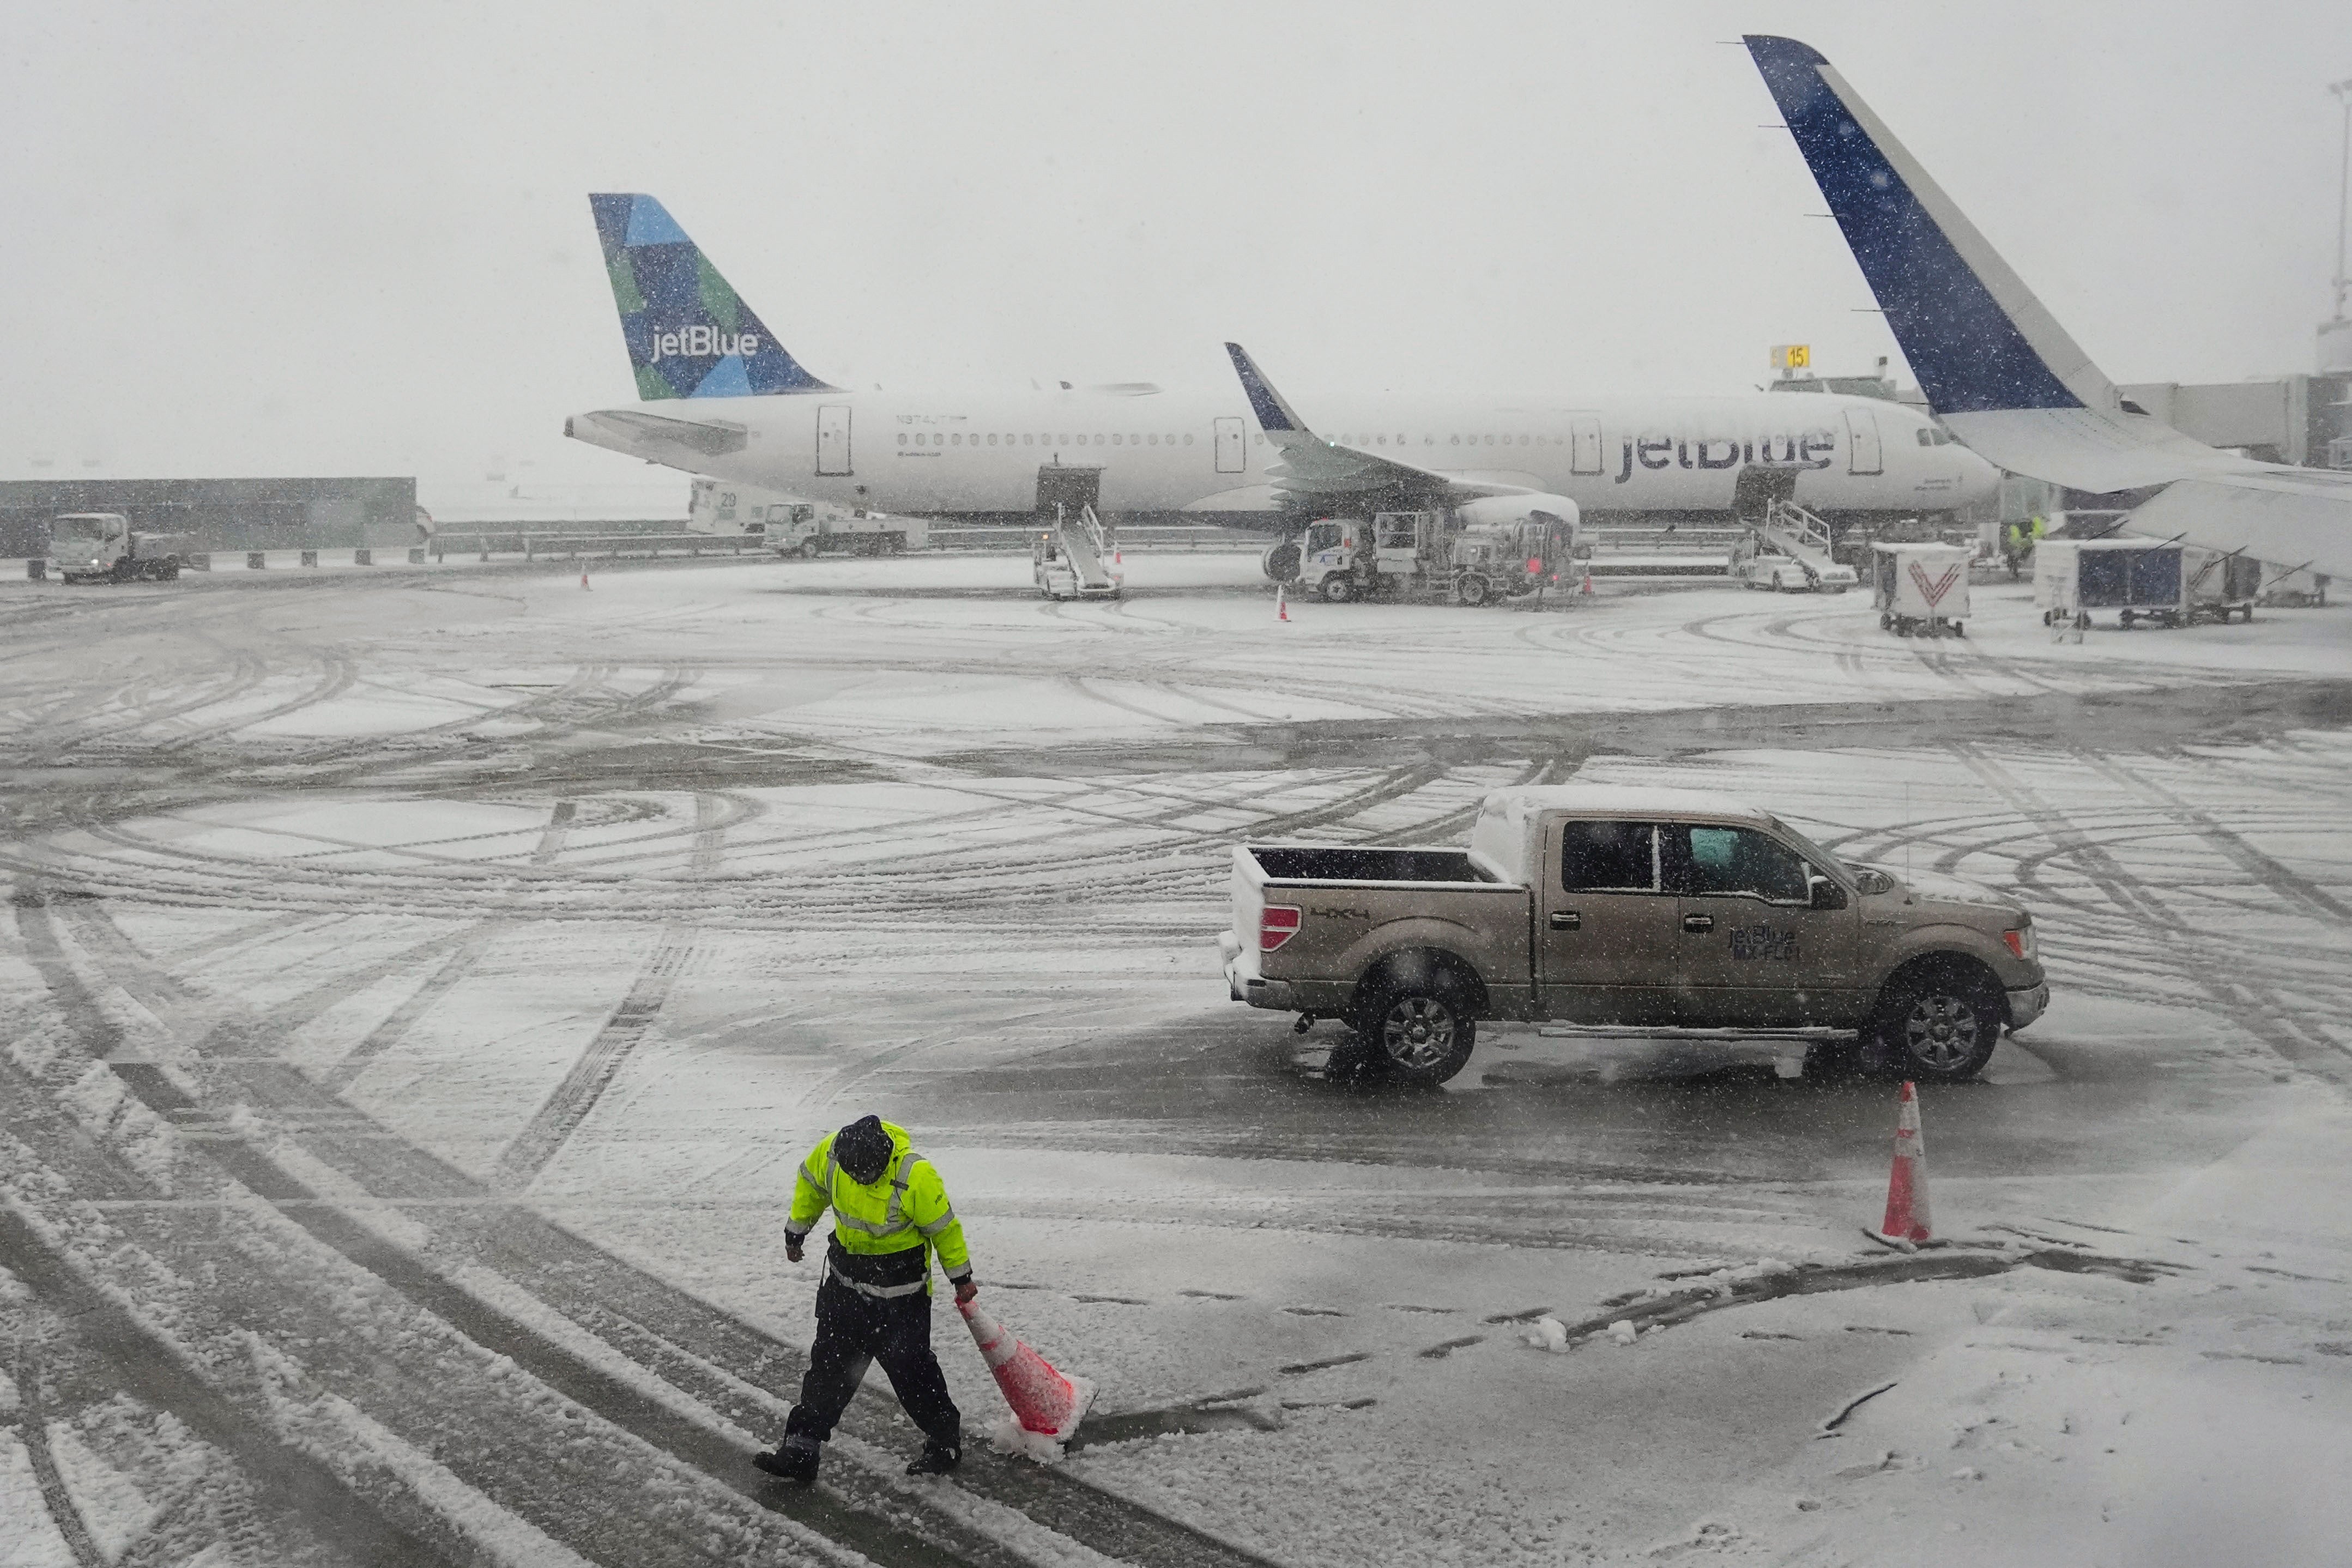 John F Kennedy International Airport, pictured above, has already cancelled 184 flights as of Tuesday morning